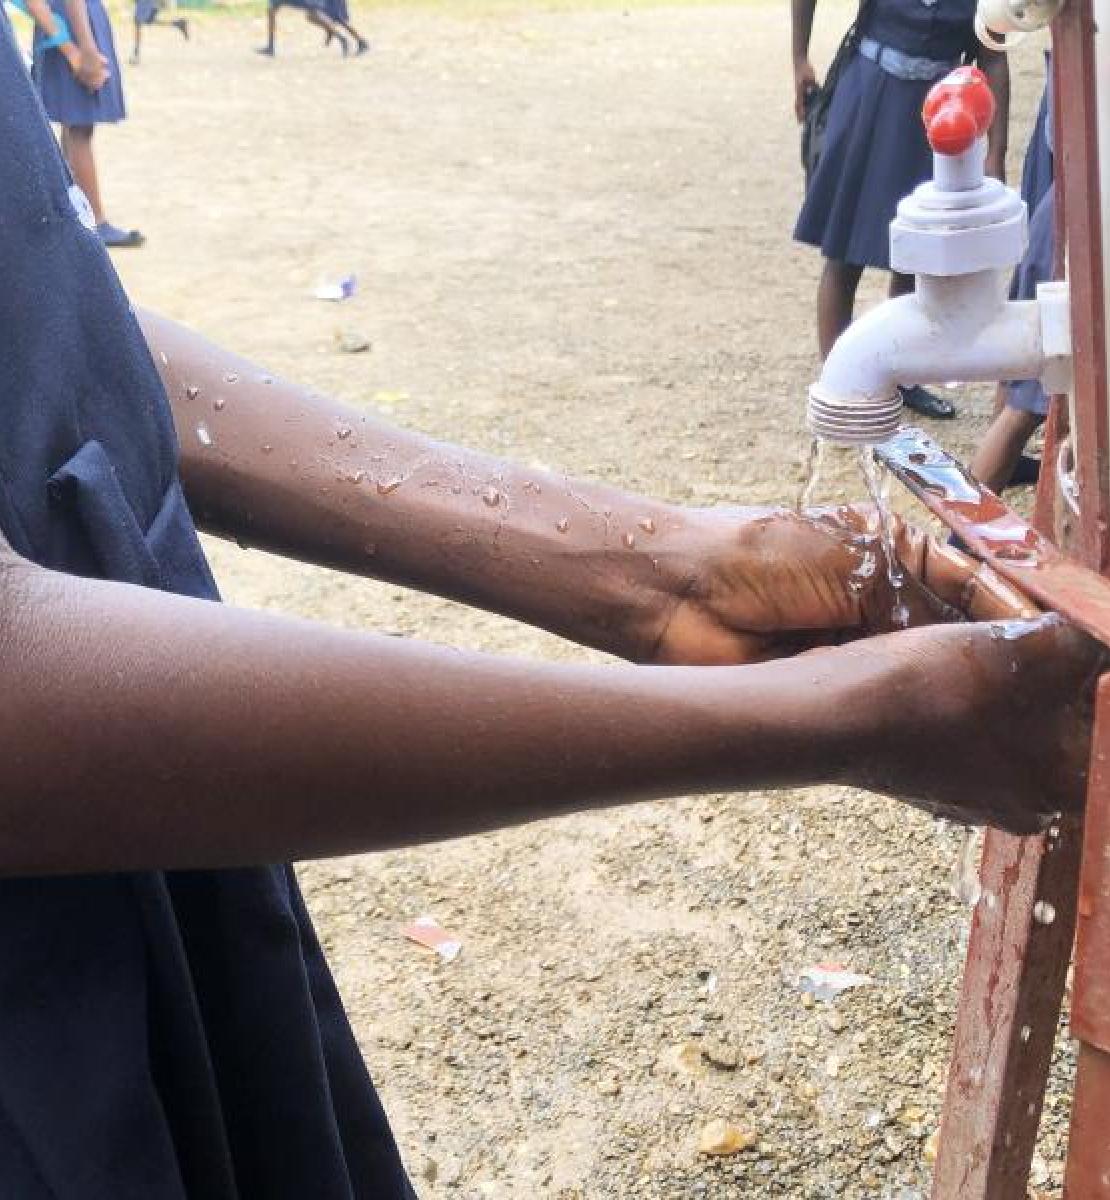 A girl in what seems to be a dark-blue school uniform washes her hands with soap outside.